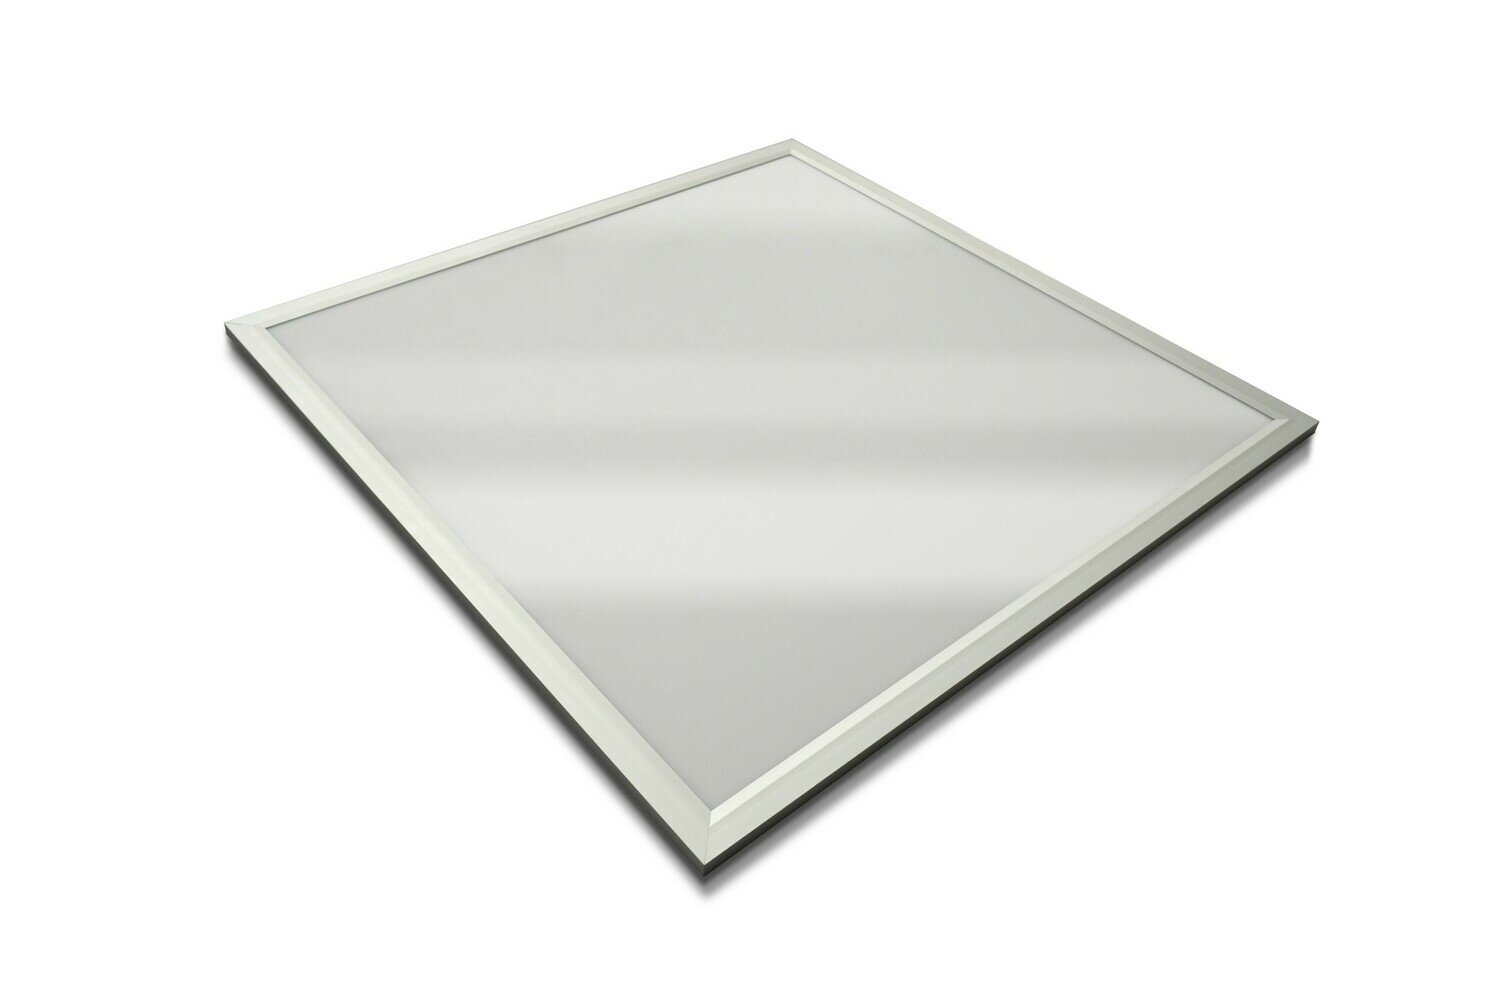 ProLuce® LED Panel PIAZZA SP 595x595x10 mm 36W, 4000K, 3240 lm, 110°, IP20, weiss, 0-10V dimmbar